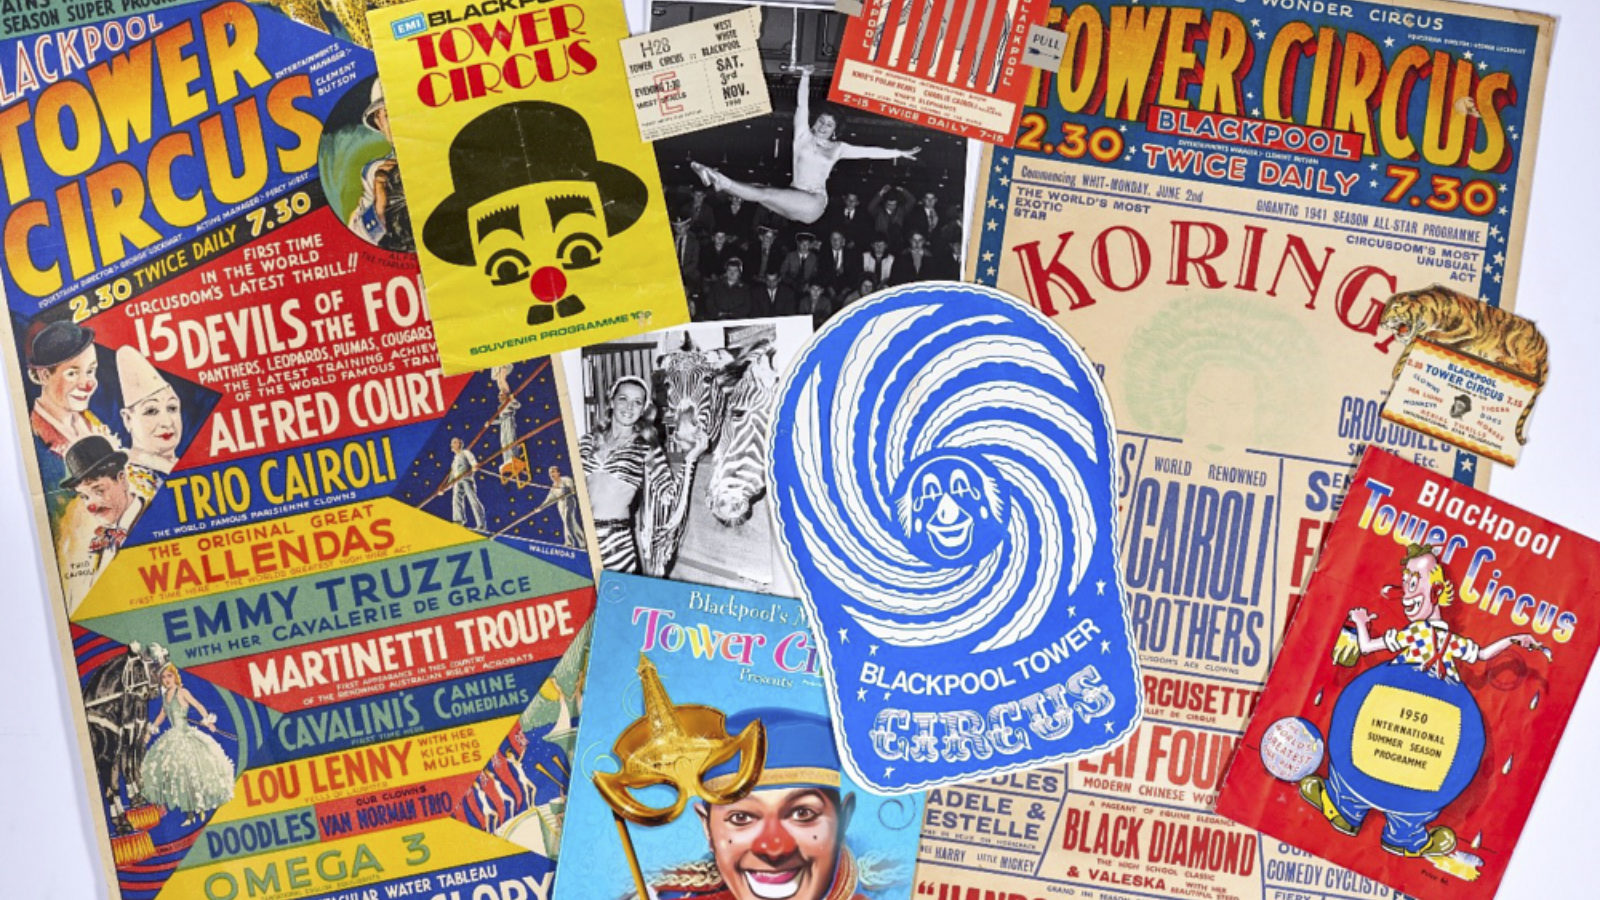 Collection of circus posters